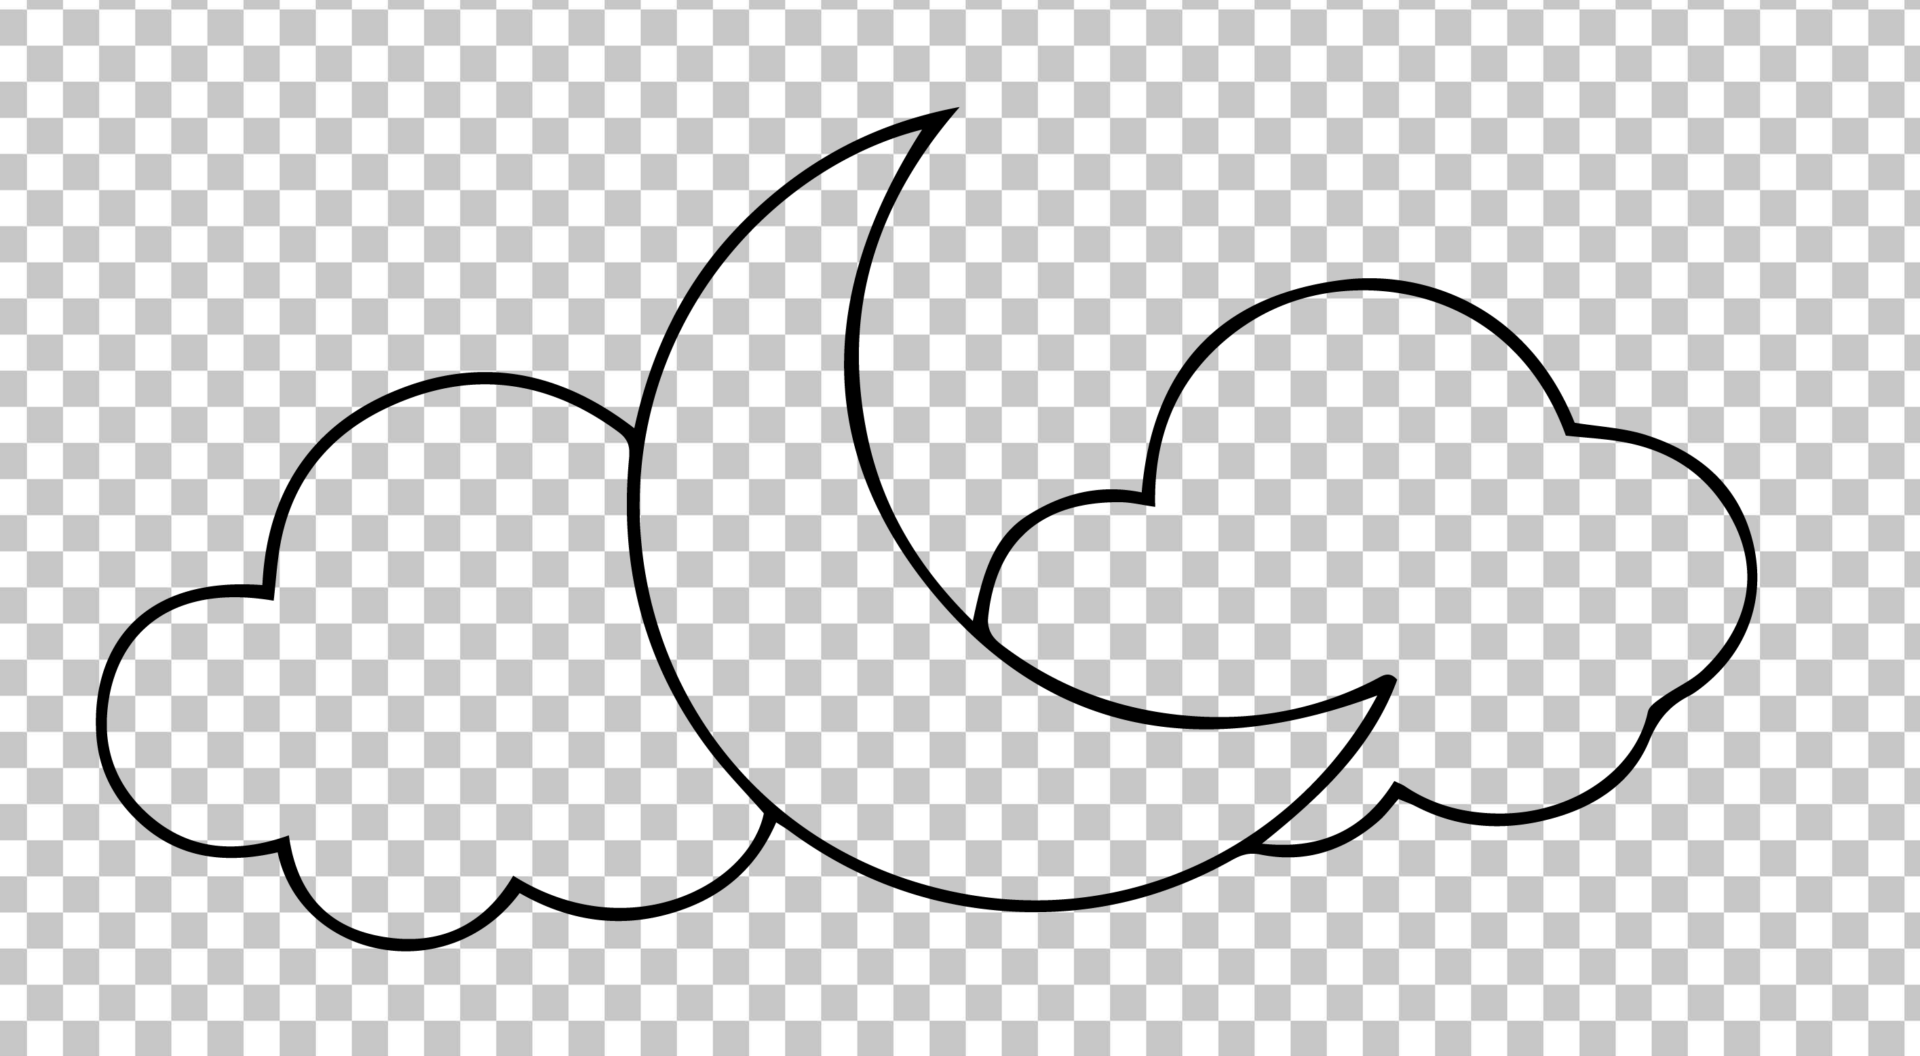 Crescent Moon and Cloud Sketch on Checkered Background PNG Image